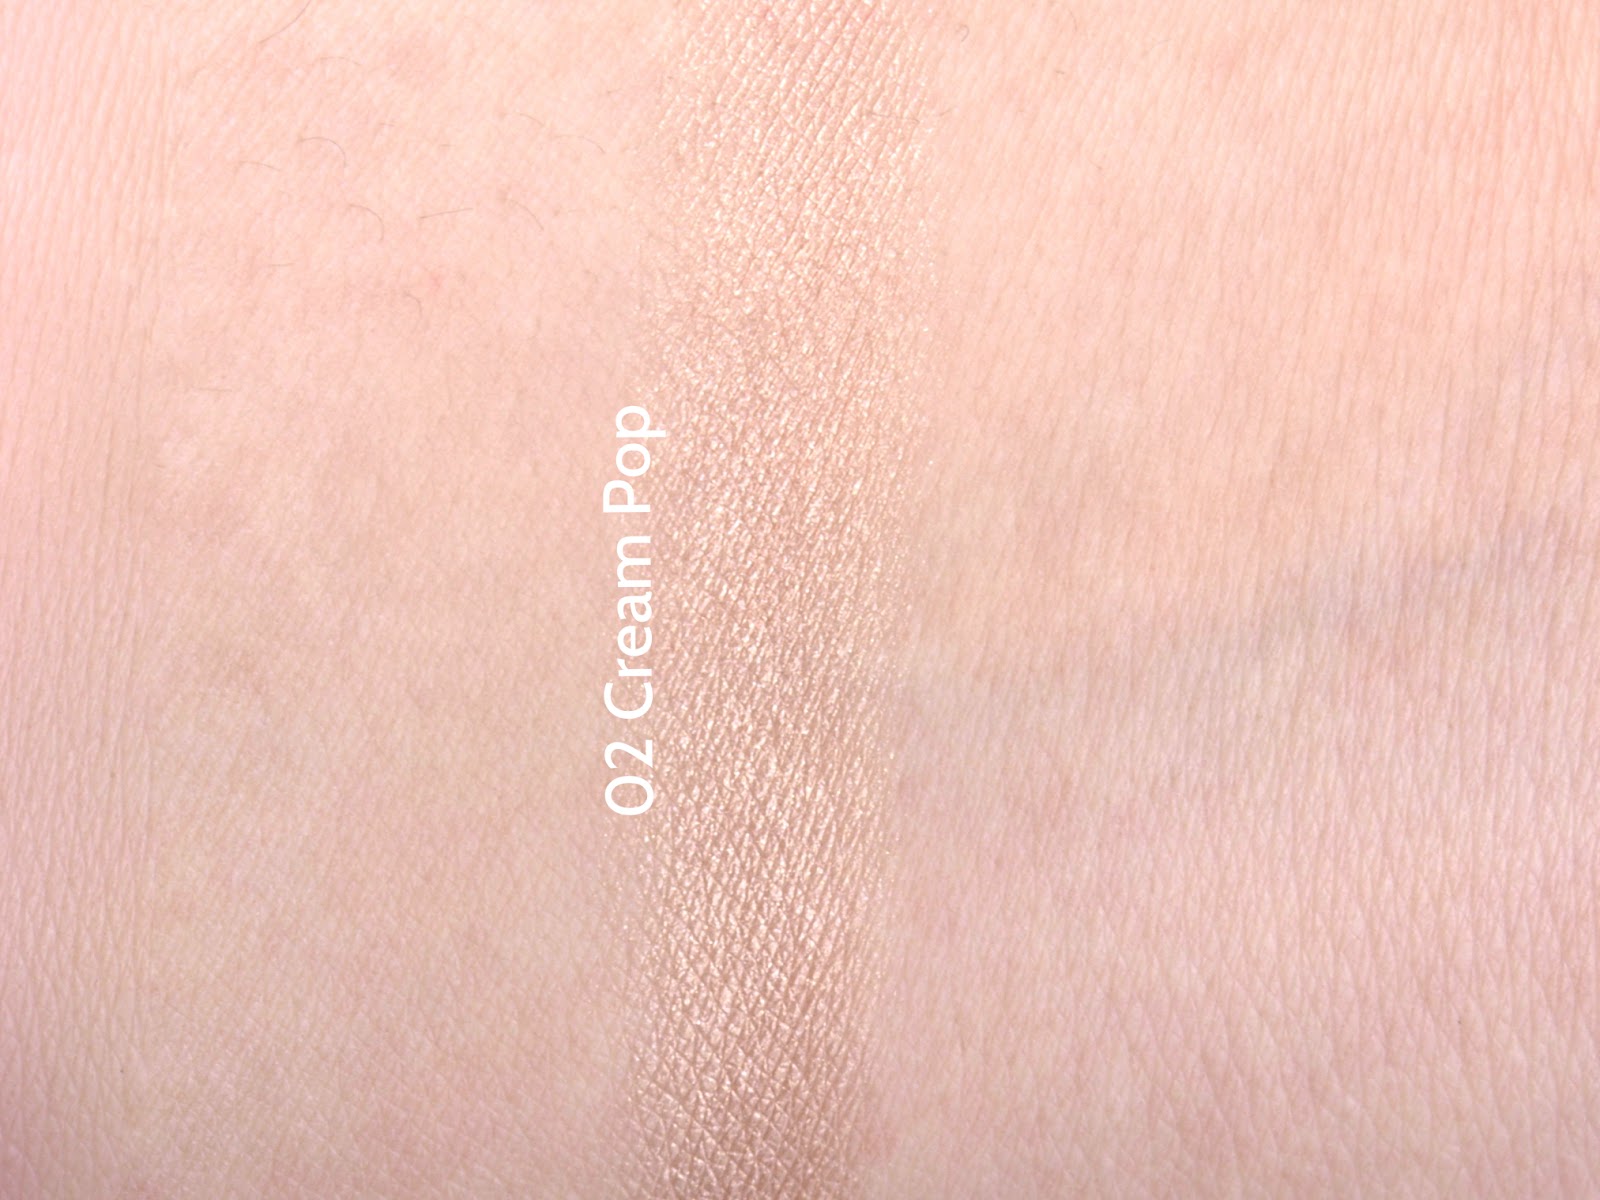 Clinique Lid Pop Eyeshadows: Review and Swatches | The Happy Sloths: and Skincare with Reviews Swatches